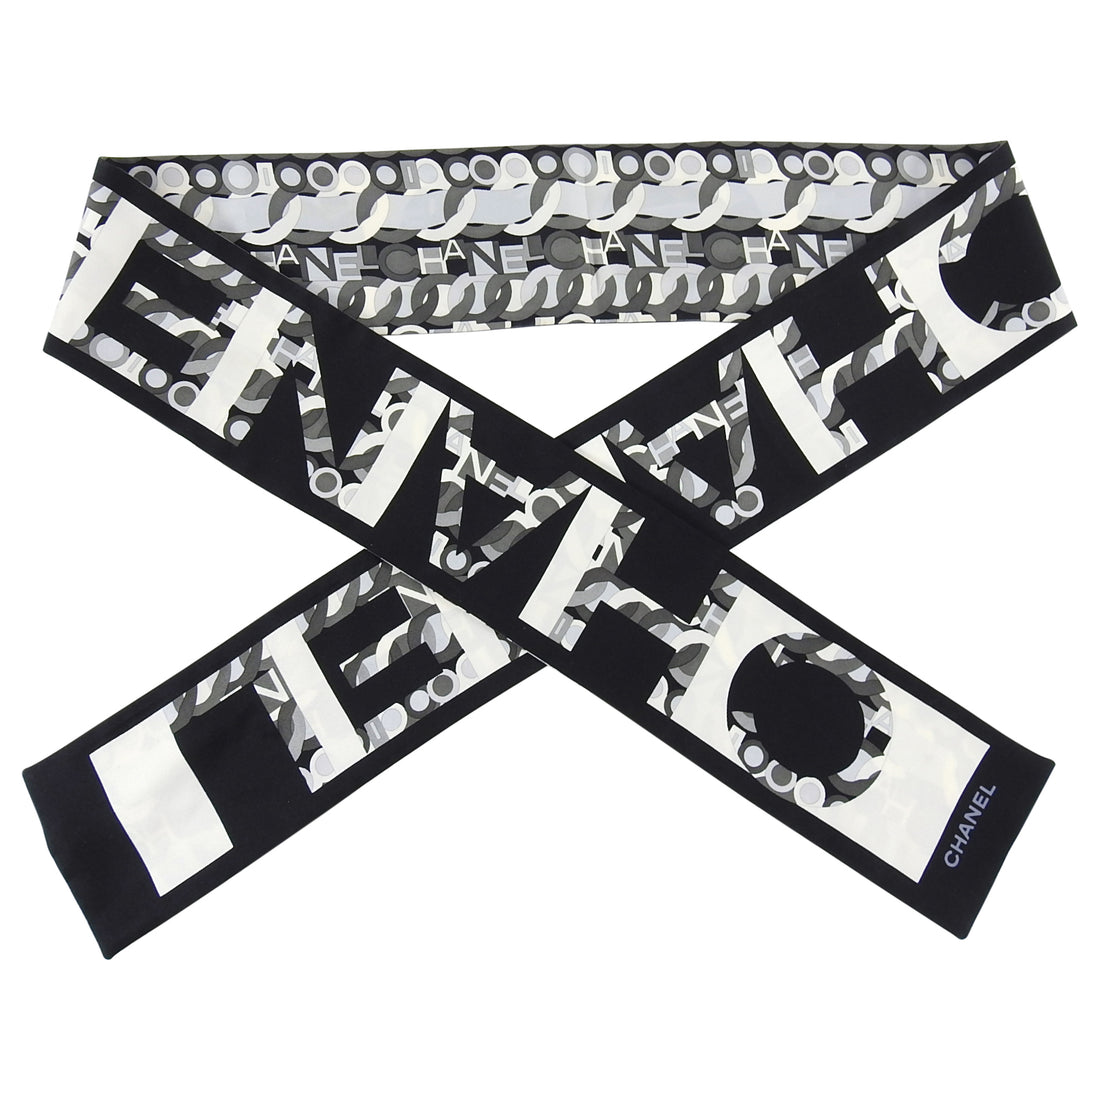 CHANEL CHANEL scarf wrap logo silk Black White Used Women CC Coco Product  Code2104101996977BRAND OFF Online Store